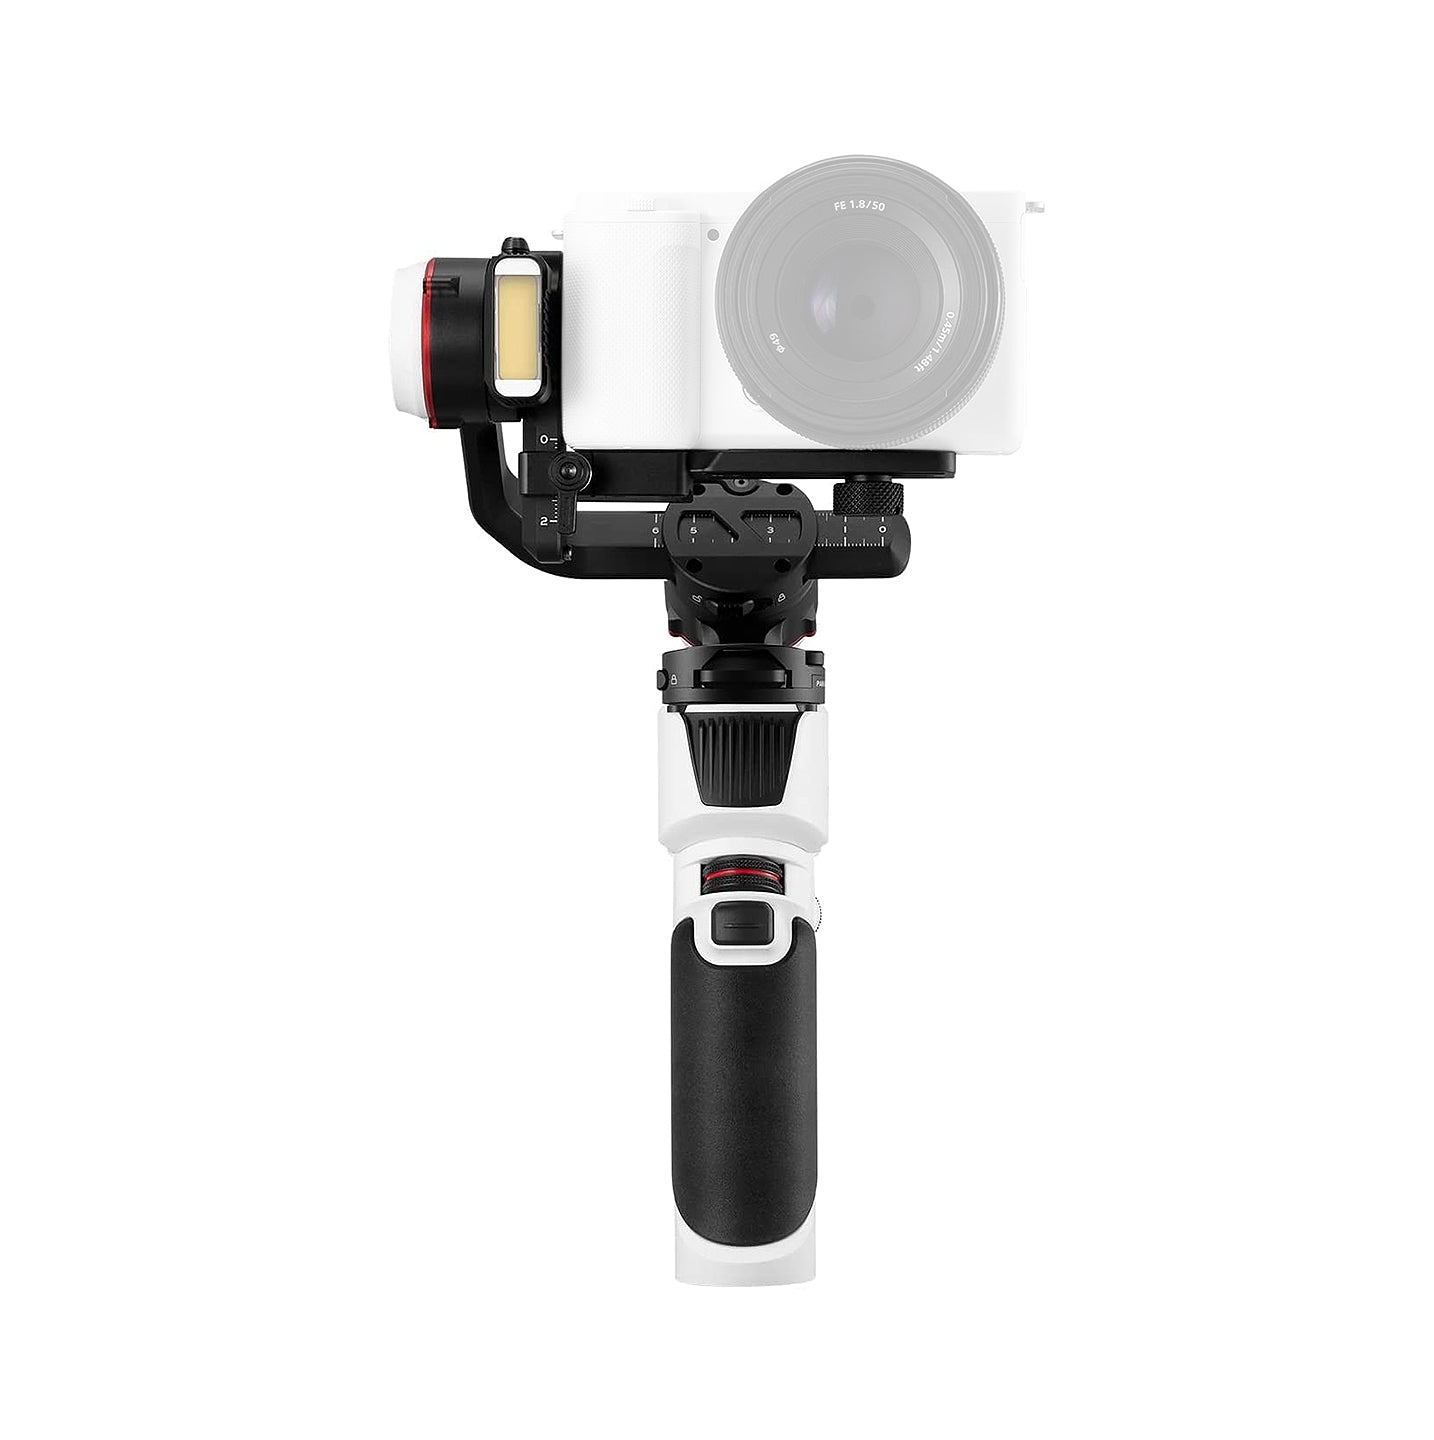 Zhiyun Crane M3 Camera 3-Axis Gimbal Stabilizer Kit with Built-in Bi-Color LED Fill Light, Tripod, 8 hrs Battery Life, Quick Release 4.0 System, 1.22" OLED Touch Display, 6.55mm Microphone Audio Port for iPhone & Android Phone